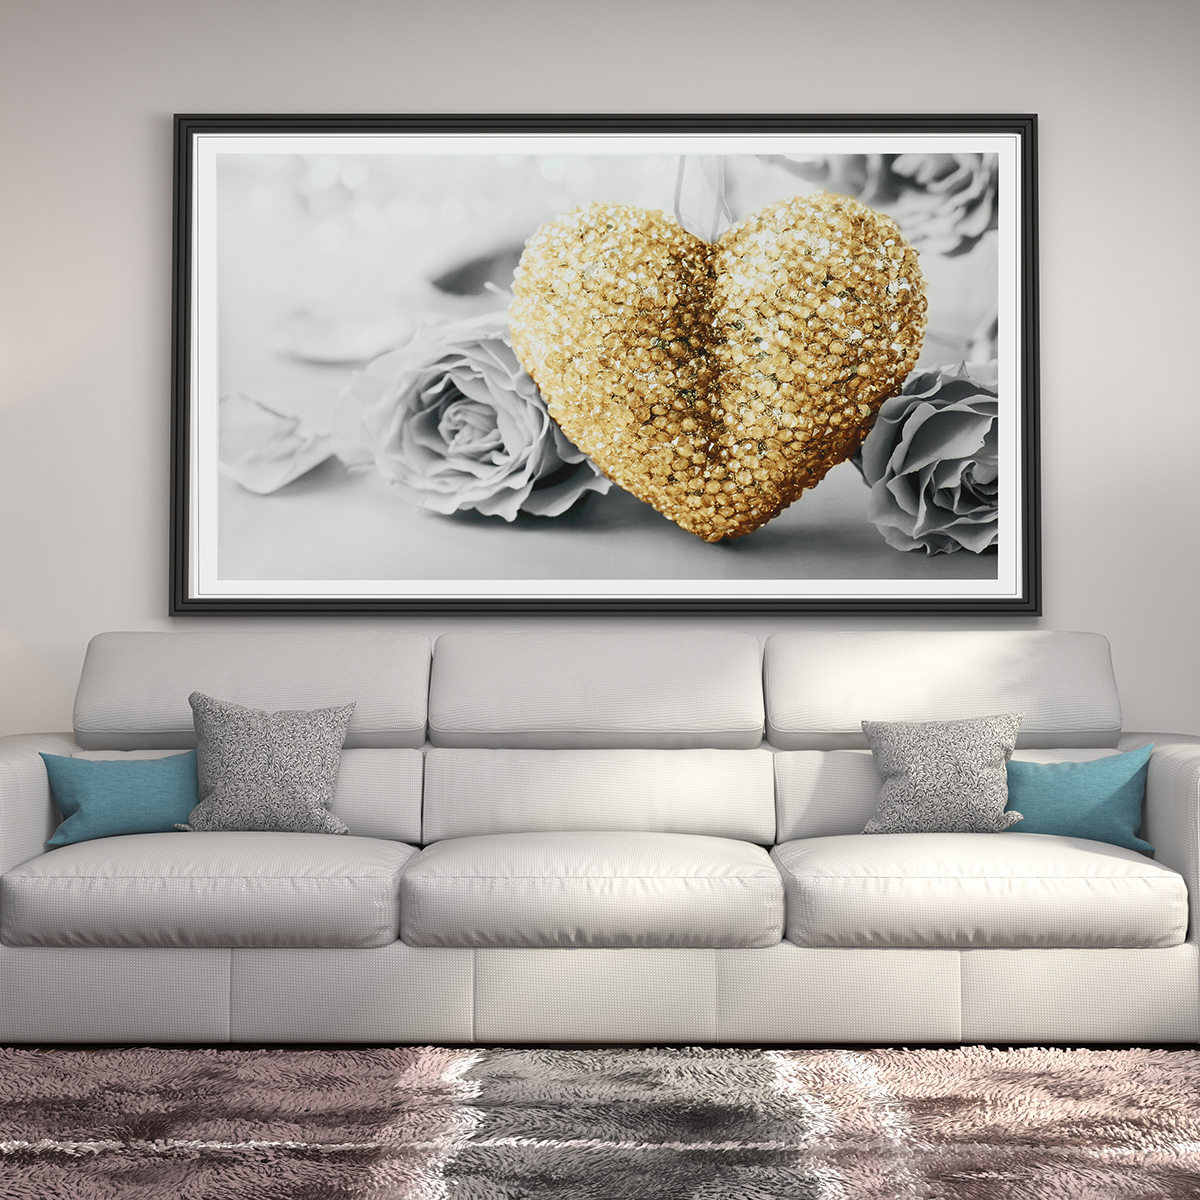 18quotx32quot-Heart-Rose-Canvas-Prints-Paintings-Pictures-Frameless-Wall-Art-Home-Decor-1386238